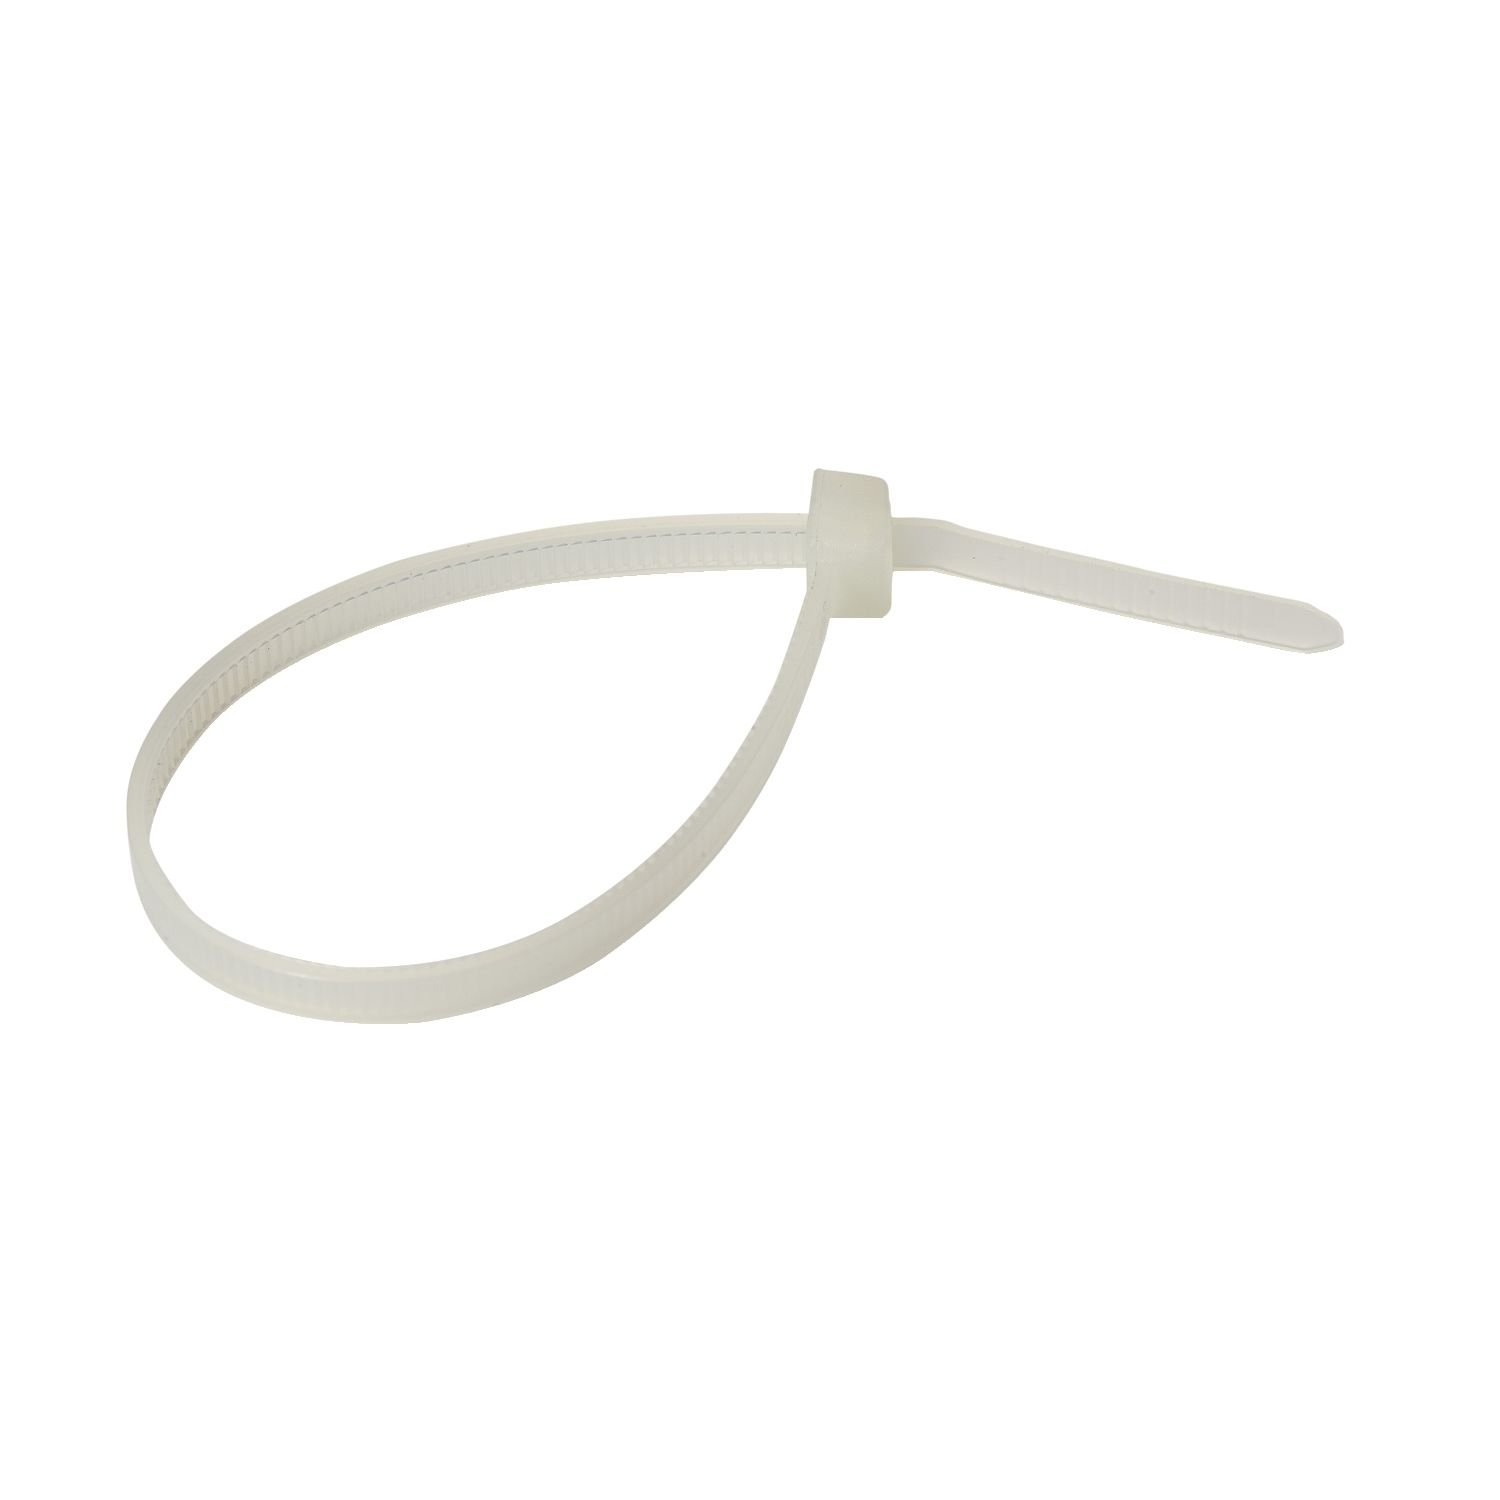 IMT46064 Thorsman - cable tie - natural - 3.6 x 150 mm